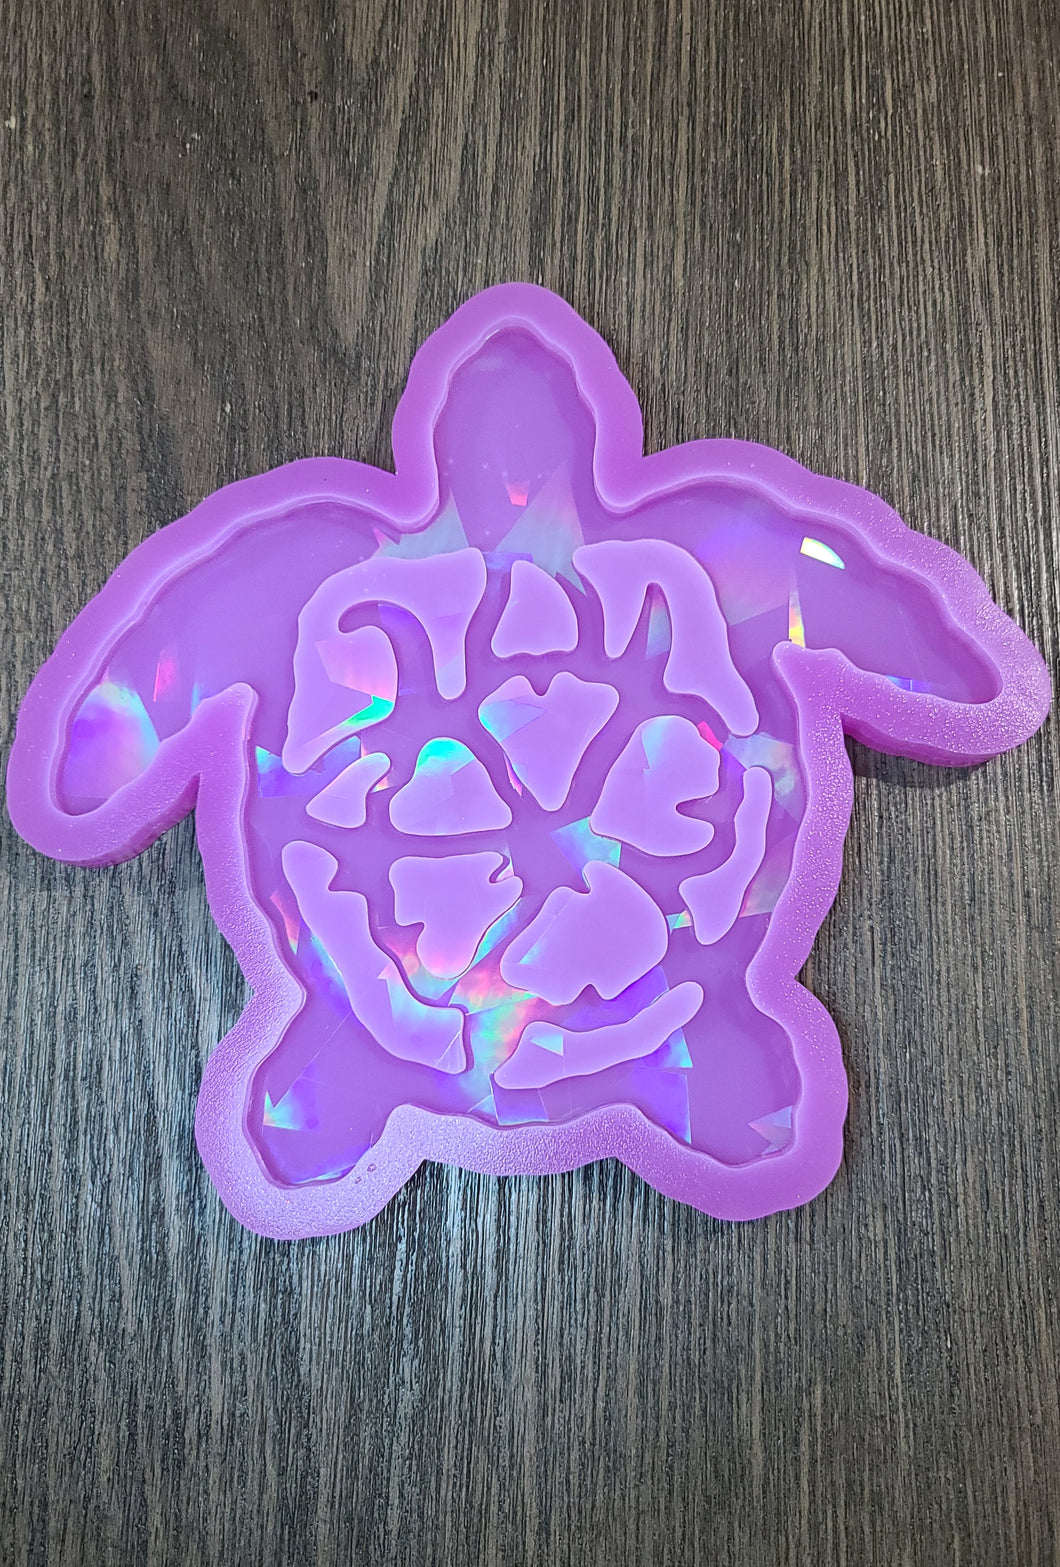 BGRADE - 6 inch HOLO Floral Turtle Silicone Mold